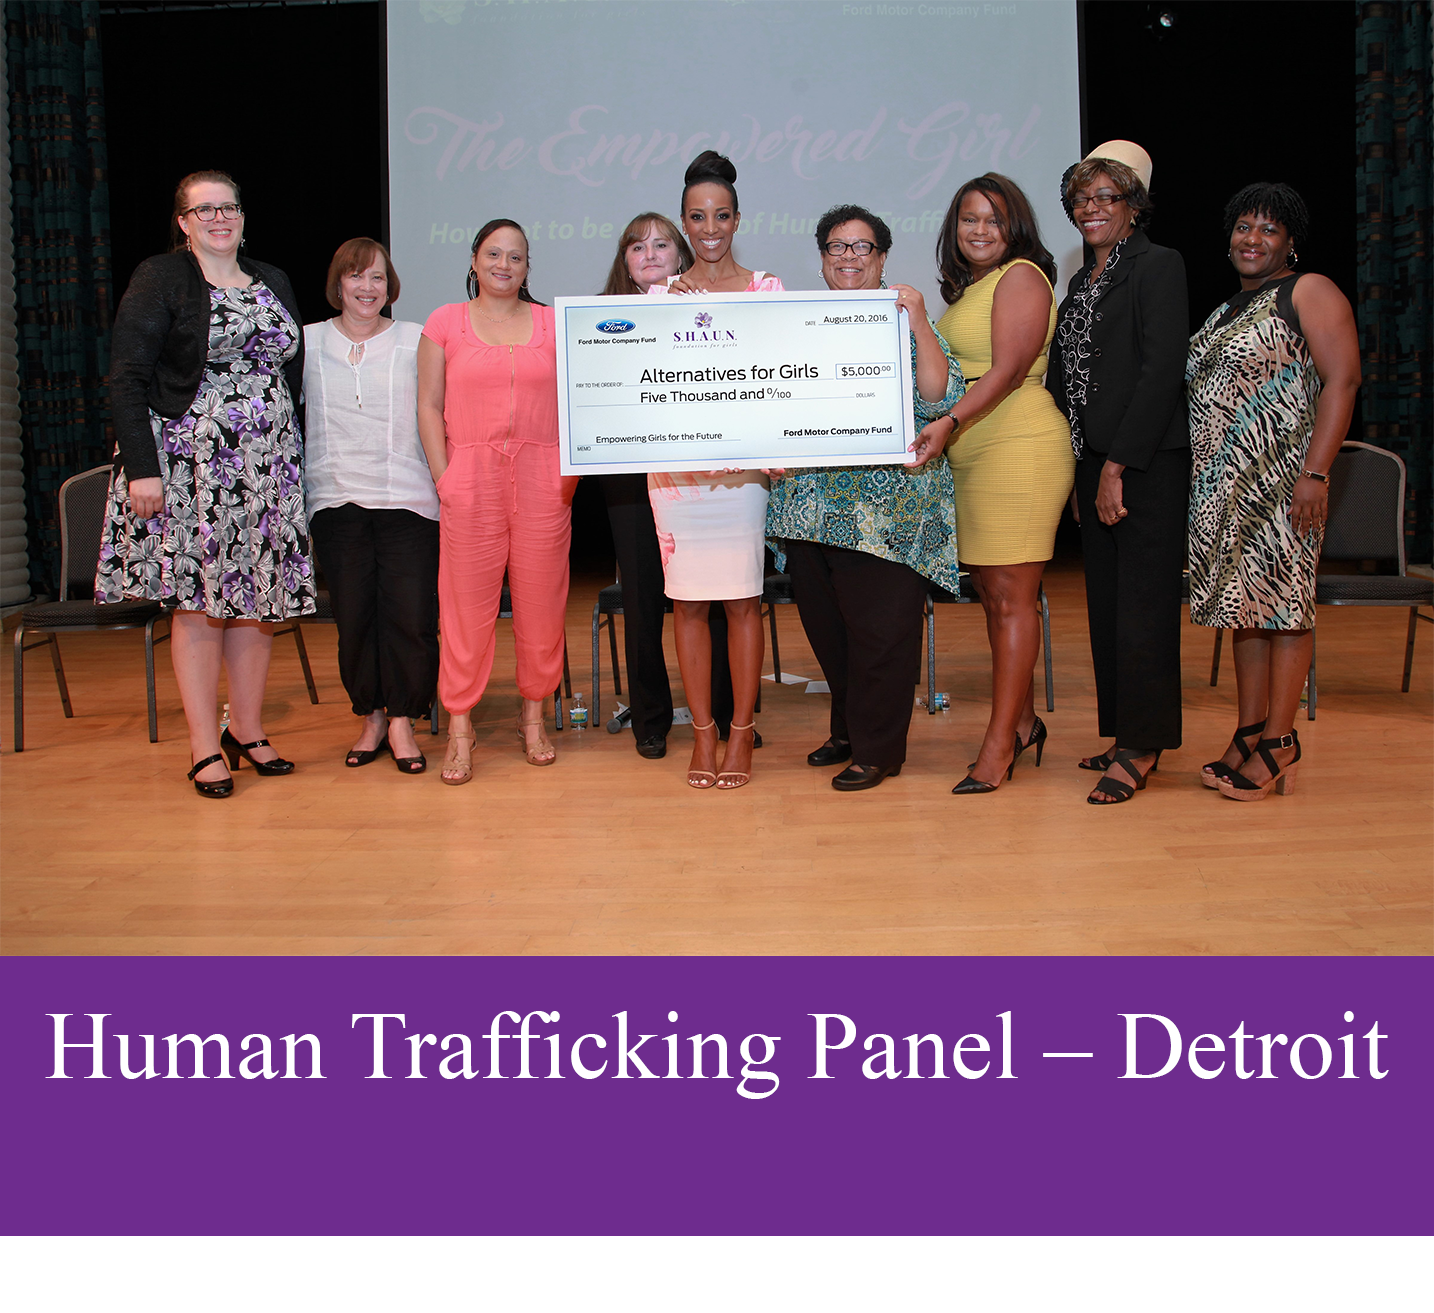 Human Trafficking Prevention Event in Detroit - video